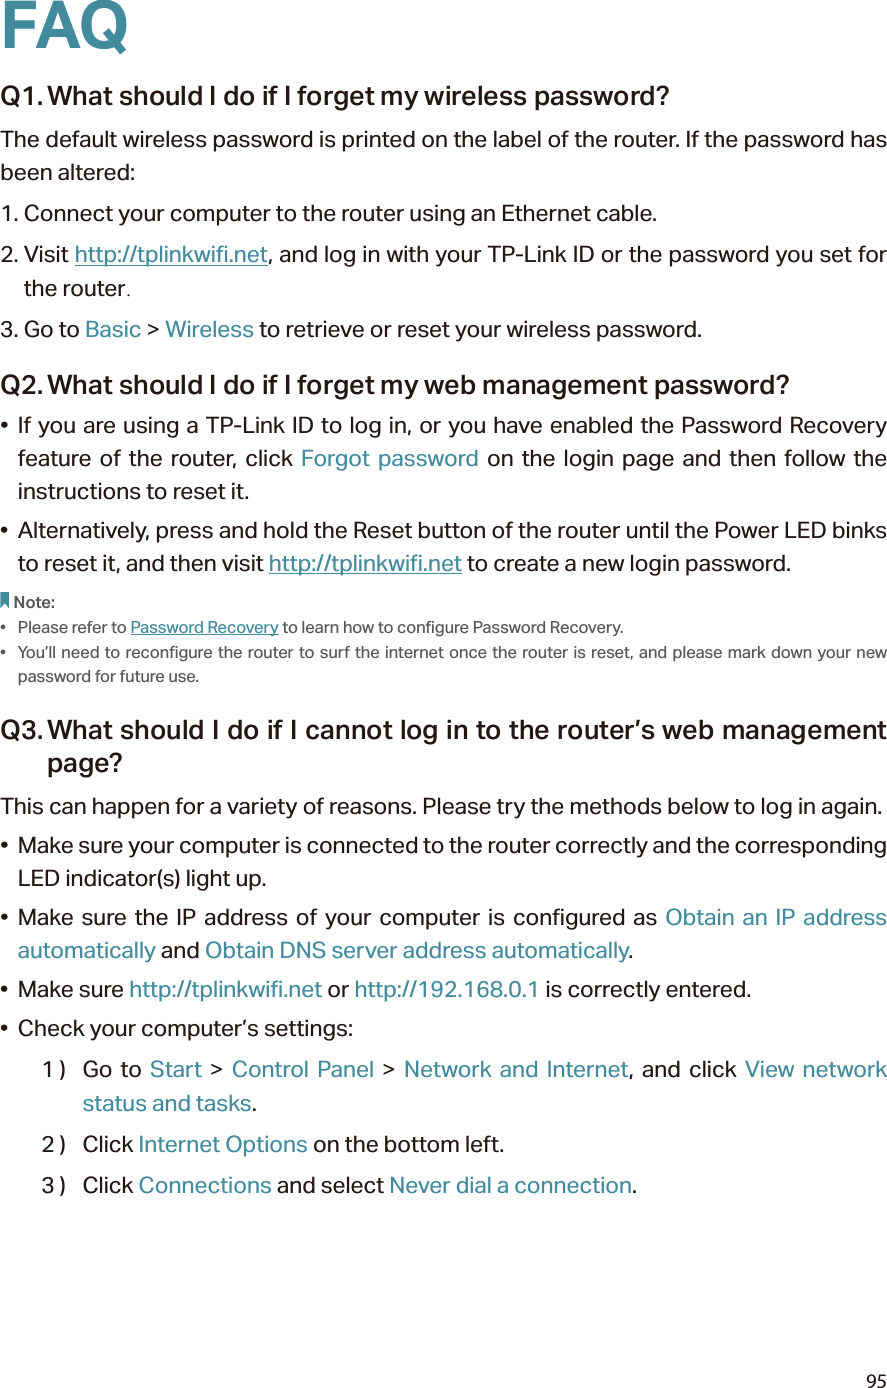 95FAQQ1. What should I do if I forget my wireless password?The default wireless password is printed on the label of the router. If the password has been altered:1. Connect your computer to the router using an Ethernet cable. 2. Visit http://tplinkwifi.net, and log in with your TP-Link ID or the password you set for the router.3. Go to Basic &gt; Wireless to retrieve or reset your wireless password.Q2. What should I do if I forget my web management password?• If you are using a TP-Link ID to log in, or you have enabled the Password Recovery feature of the router, click Forgot password on the login page and then follow the instructions to reset it.•  Alternatively, press and hold the Reset button of the router until the Power LED binks to reset it, and then visit http://tplinkwifi.net to create a new login password.Note: •  Please refer to Password Recovery to learn how to configure Password Recovery.•  You’ll need to reconfigure the router to surf the internet once the router is reset, and please mark down your new password for future use.Q3. What should I do if I cannot log in to the router’s web management page?This can happen for a variety of reasons. Please try the methods below to log in again.•  Make sure your computer is connected to the router correctly and the corresponding LED indicator(s) light up.• Make sure the IP address of your computer is configured as Obtain an IP address automatically and Obtain DNS server address automatically.• Make sure http://tplinkwifi.net or http://192.168.0.1 is correctly entered.•  Check your computer’s settings:1 )  Go  to  Start &gt; Control Panel &gt; Network and Internet, and click View network status and tasks.2 )  Click Internet Options on the bottom left.3 )  Click Connections and select Never dial a connection.